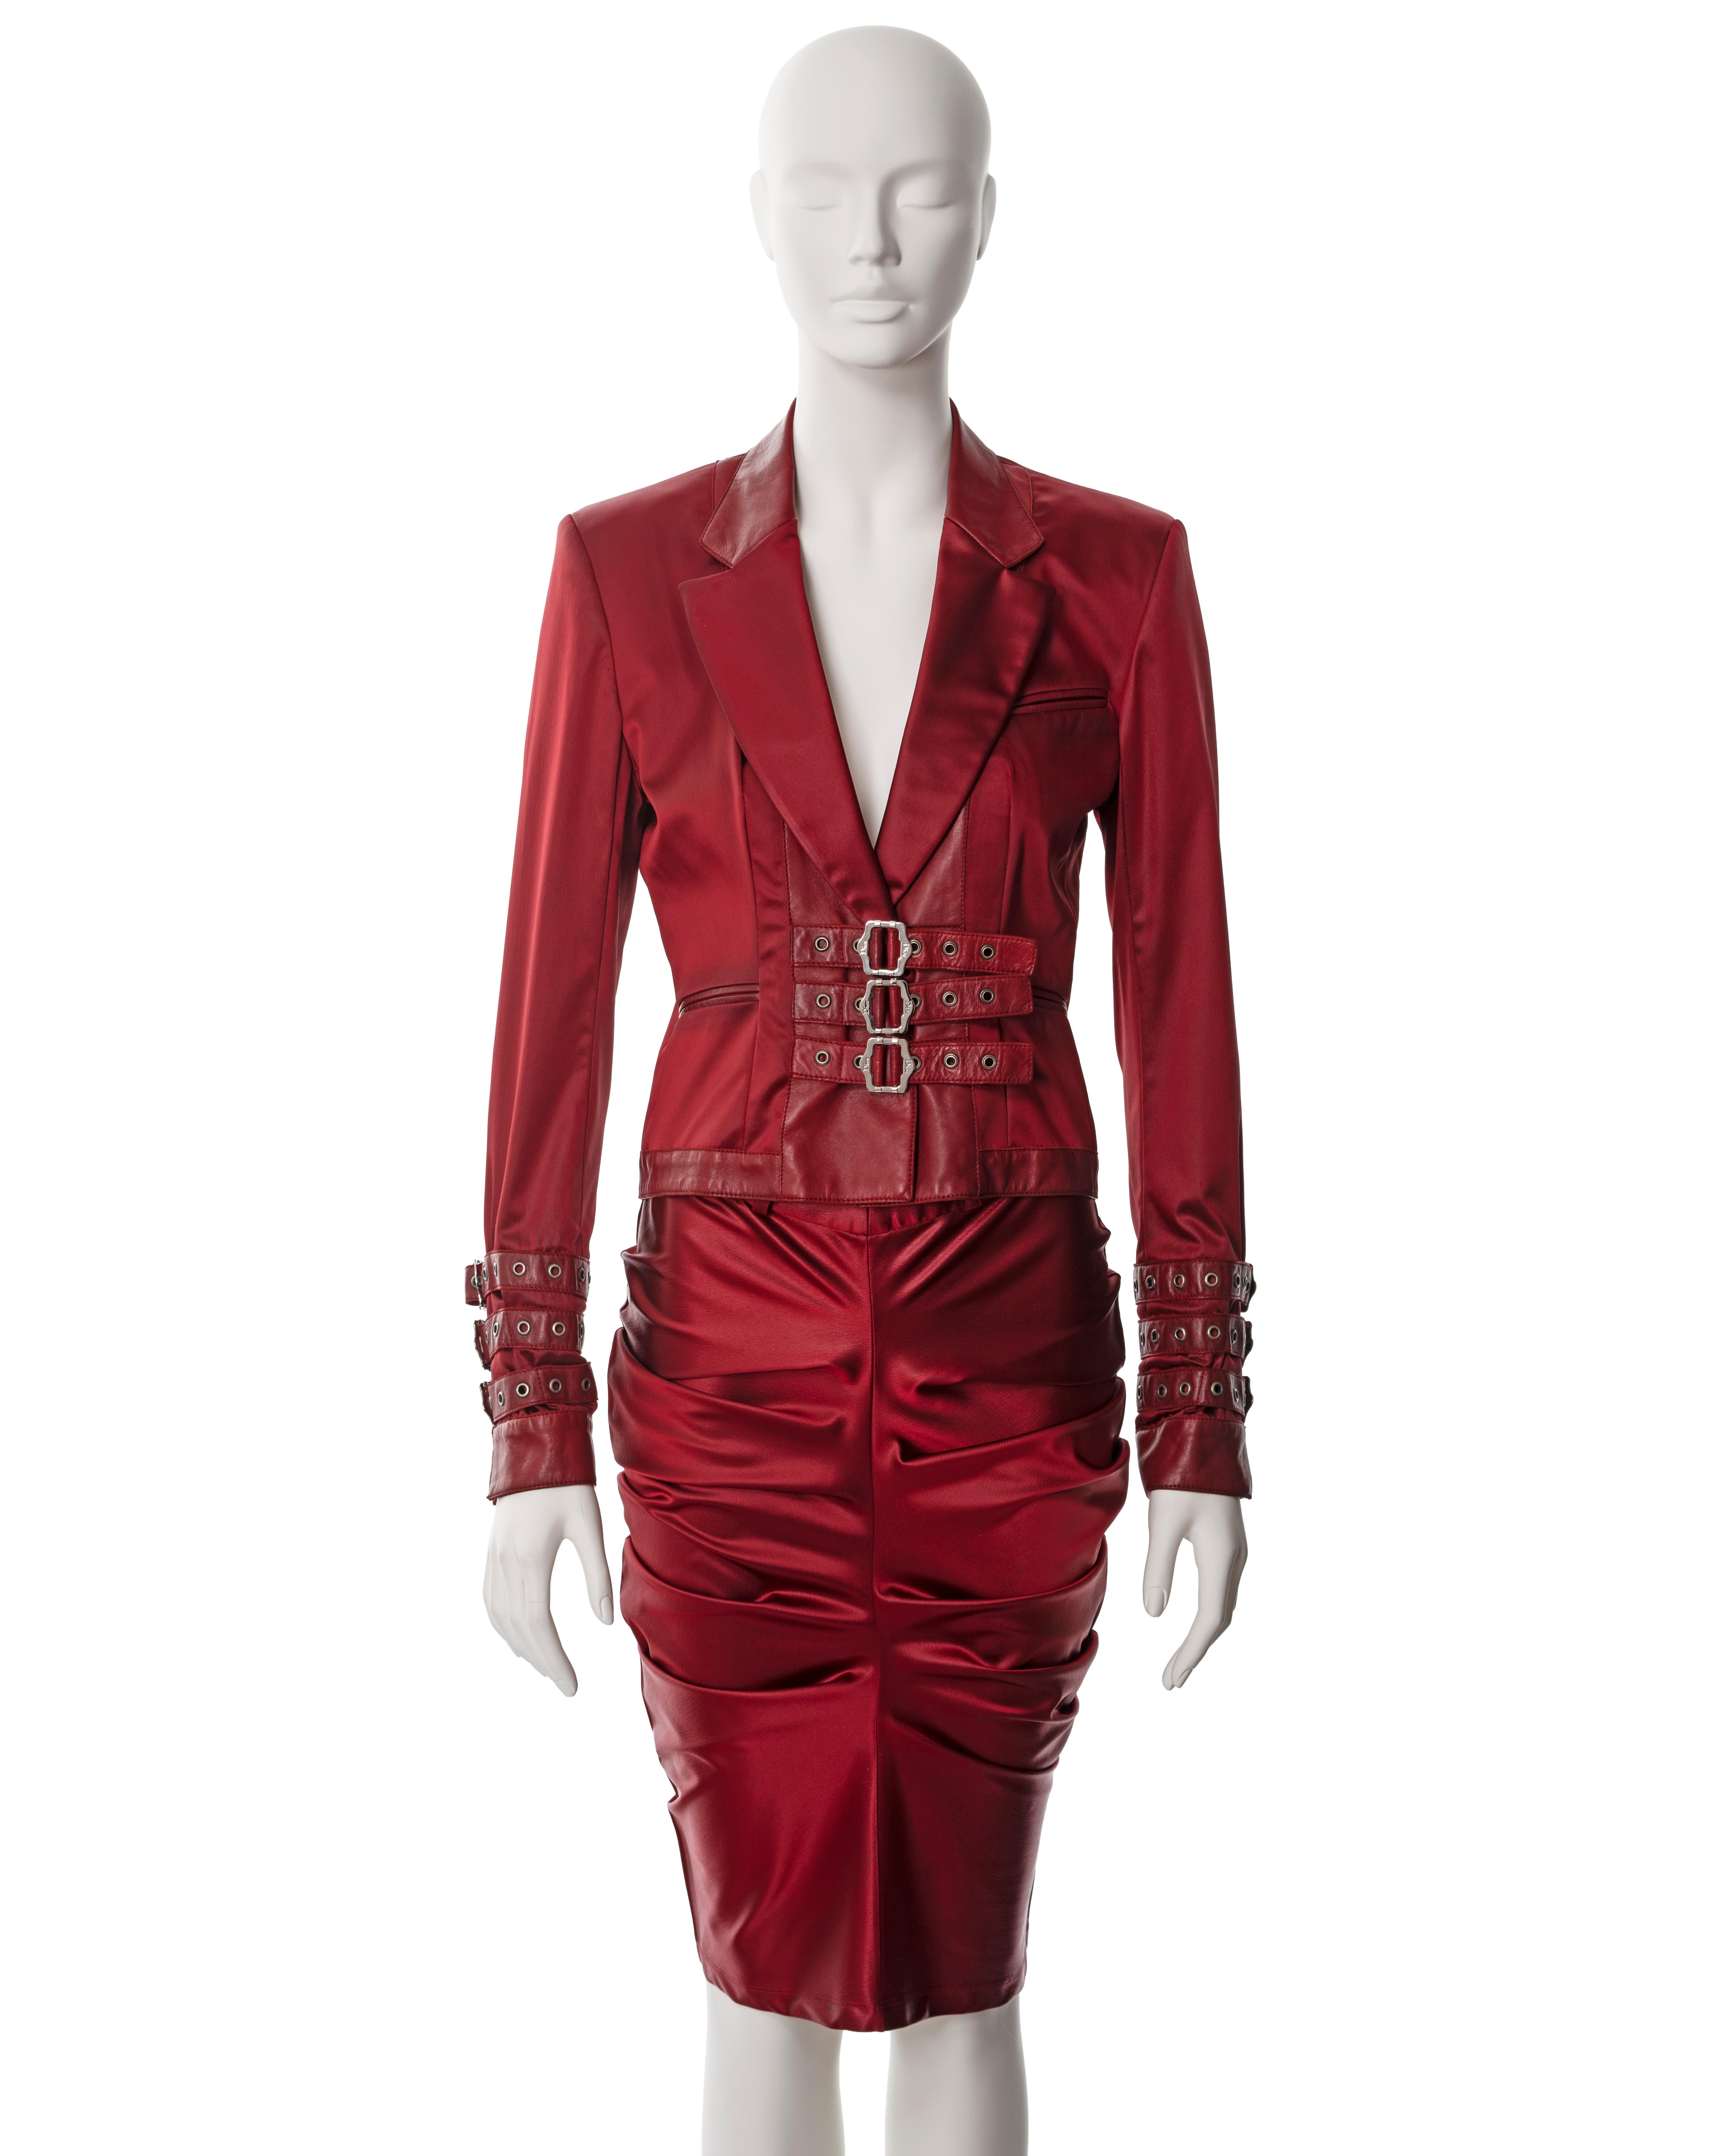 ▪ Christian Dior red satin skirt suit 
▪ Designed by John Galliano
▪ Sold by One of a Kind Archive
▪ Fall-Winter 2003
▪ Constructed from red satin and leather 
▪ Single-breasted jacket with multiple silver-metal roller buckles 
▪ Matching fitted